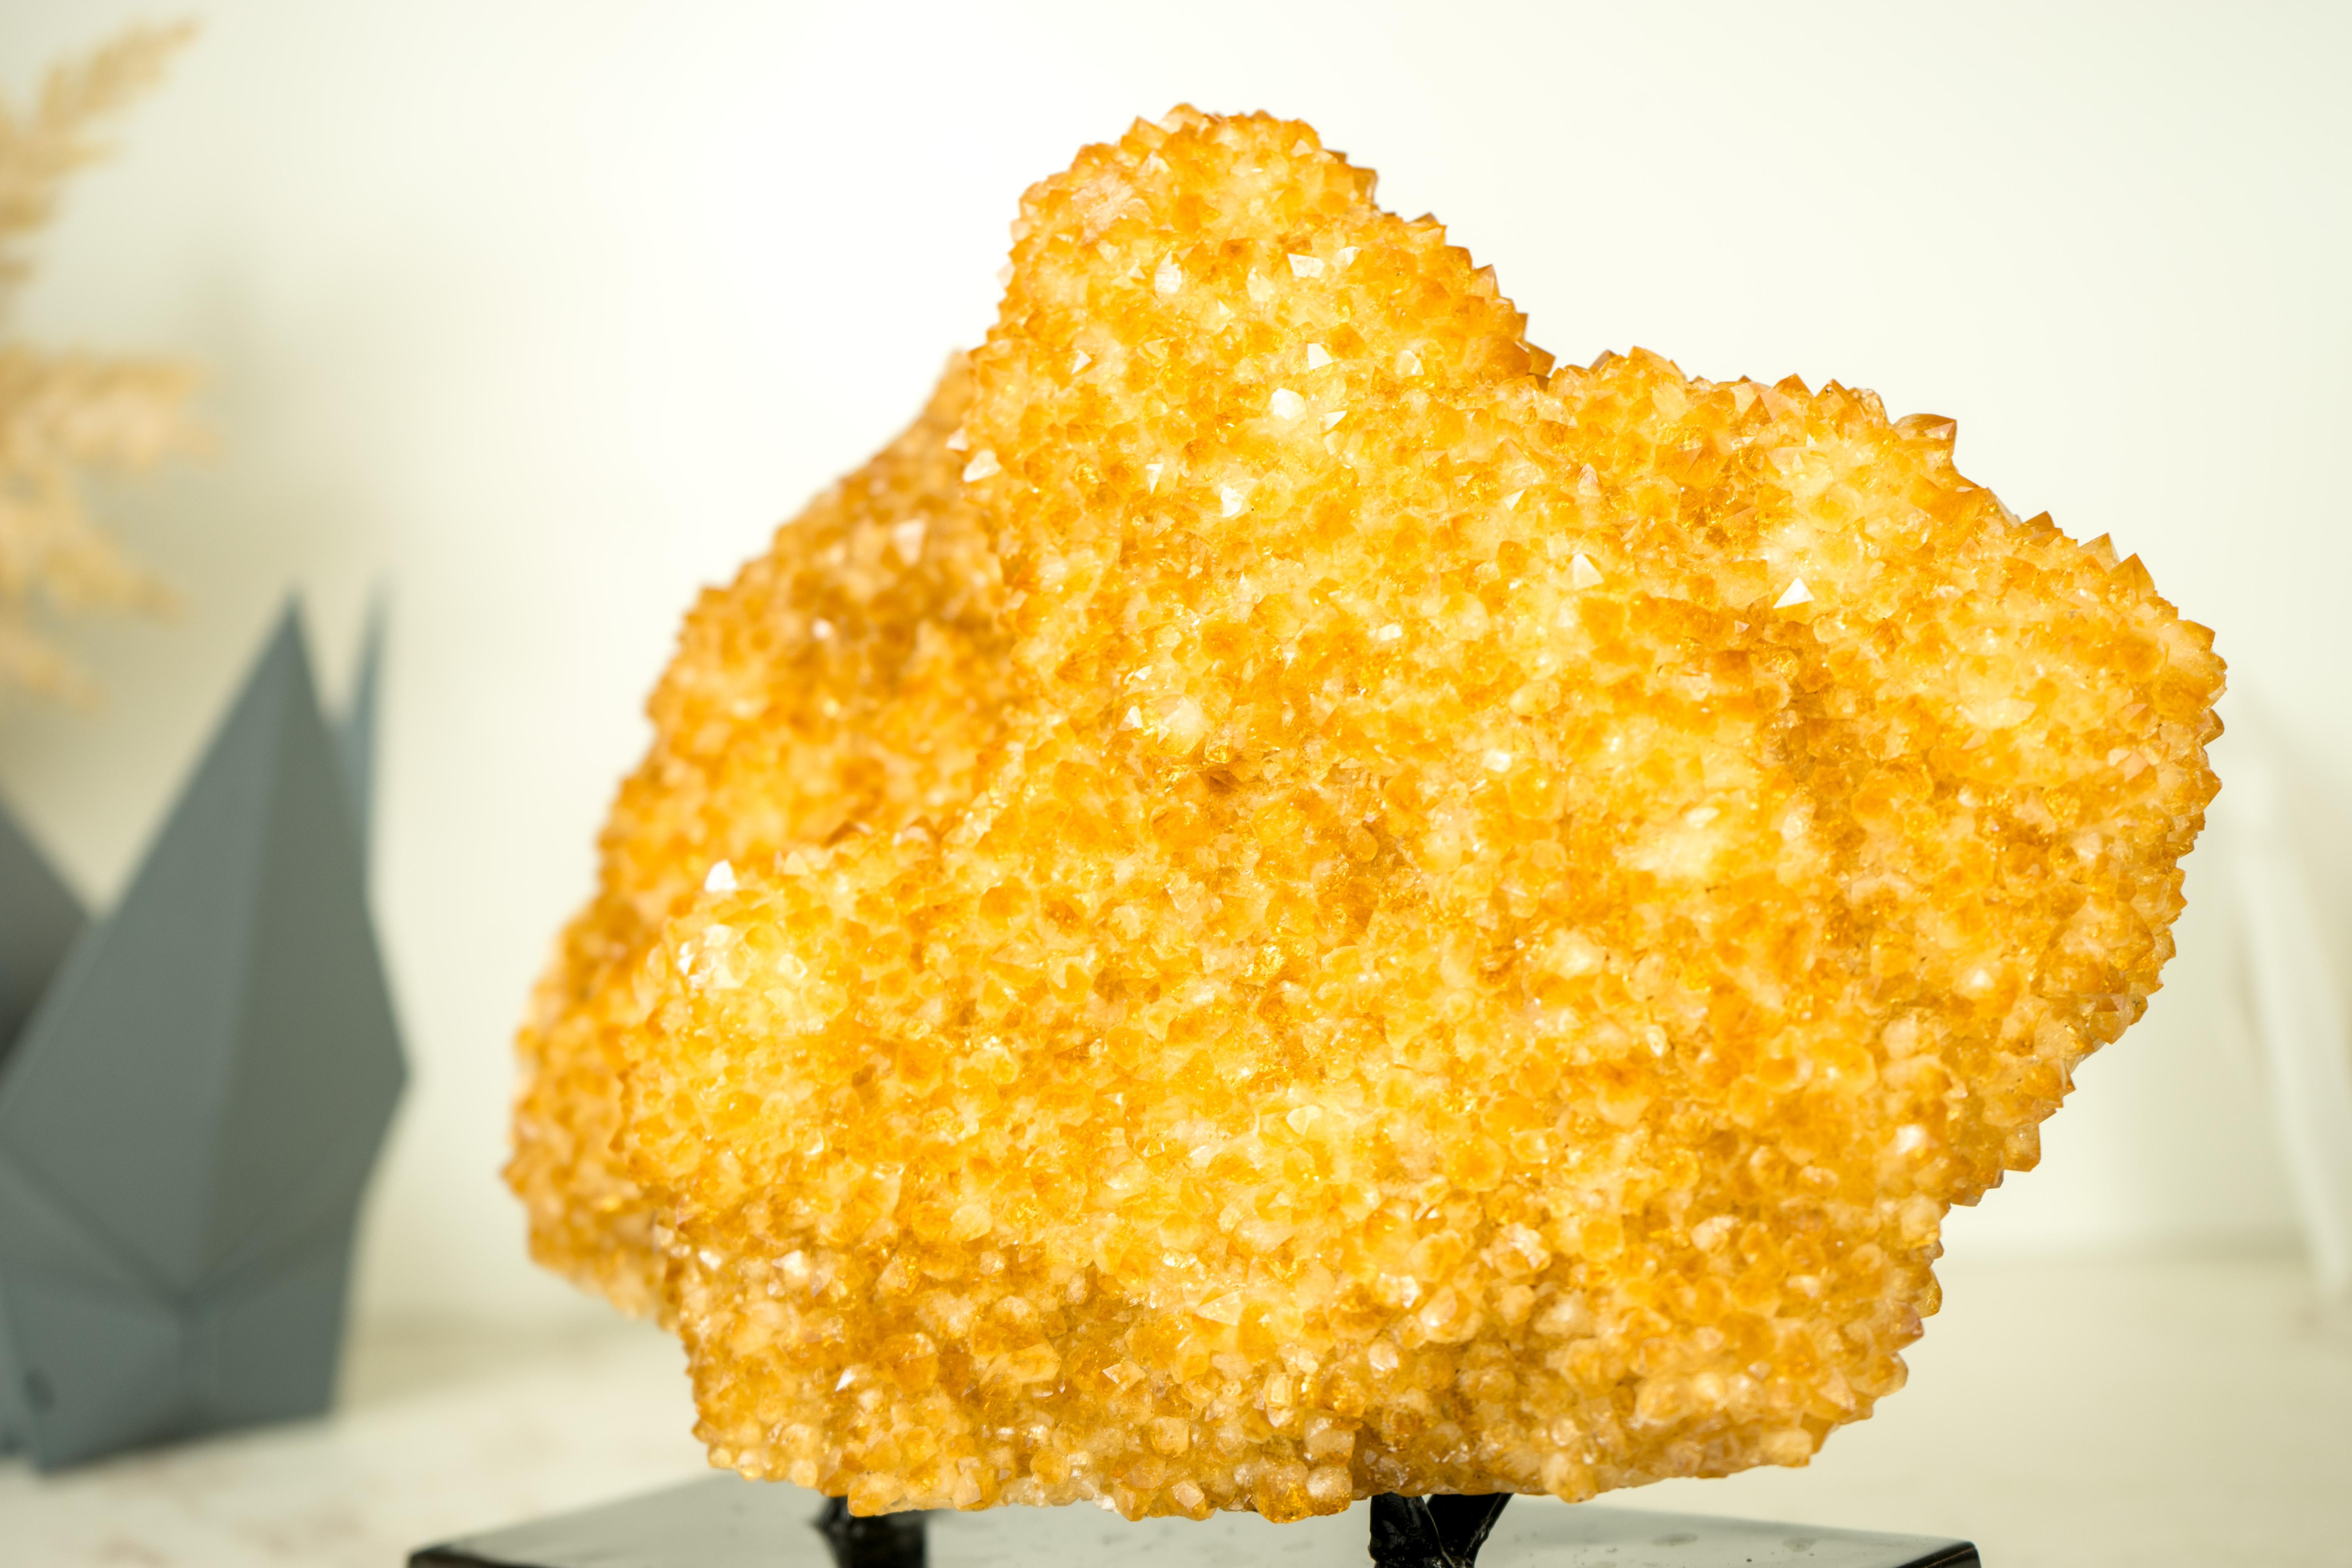 Yellow Citrine Cluster with Rare Citrine Stalactite Flower Formation

▫️ Description ▫️

A Citrine Cluster that displays many striking and rare characteristics such as its golden yellow color, and bright points that are known as Galaxy Citrine. This